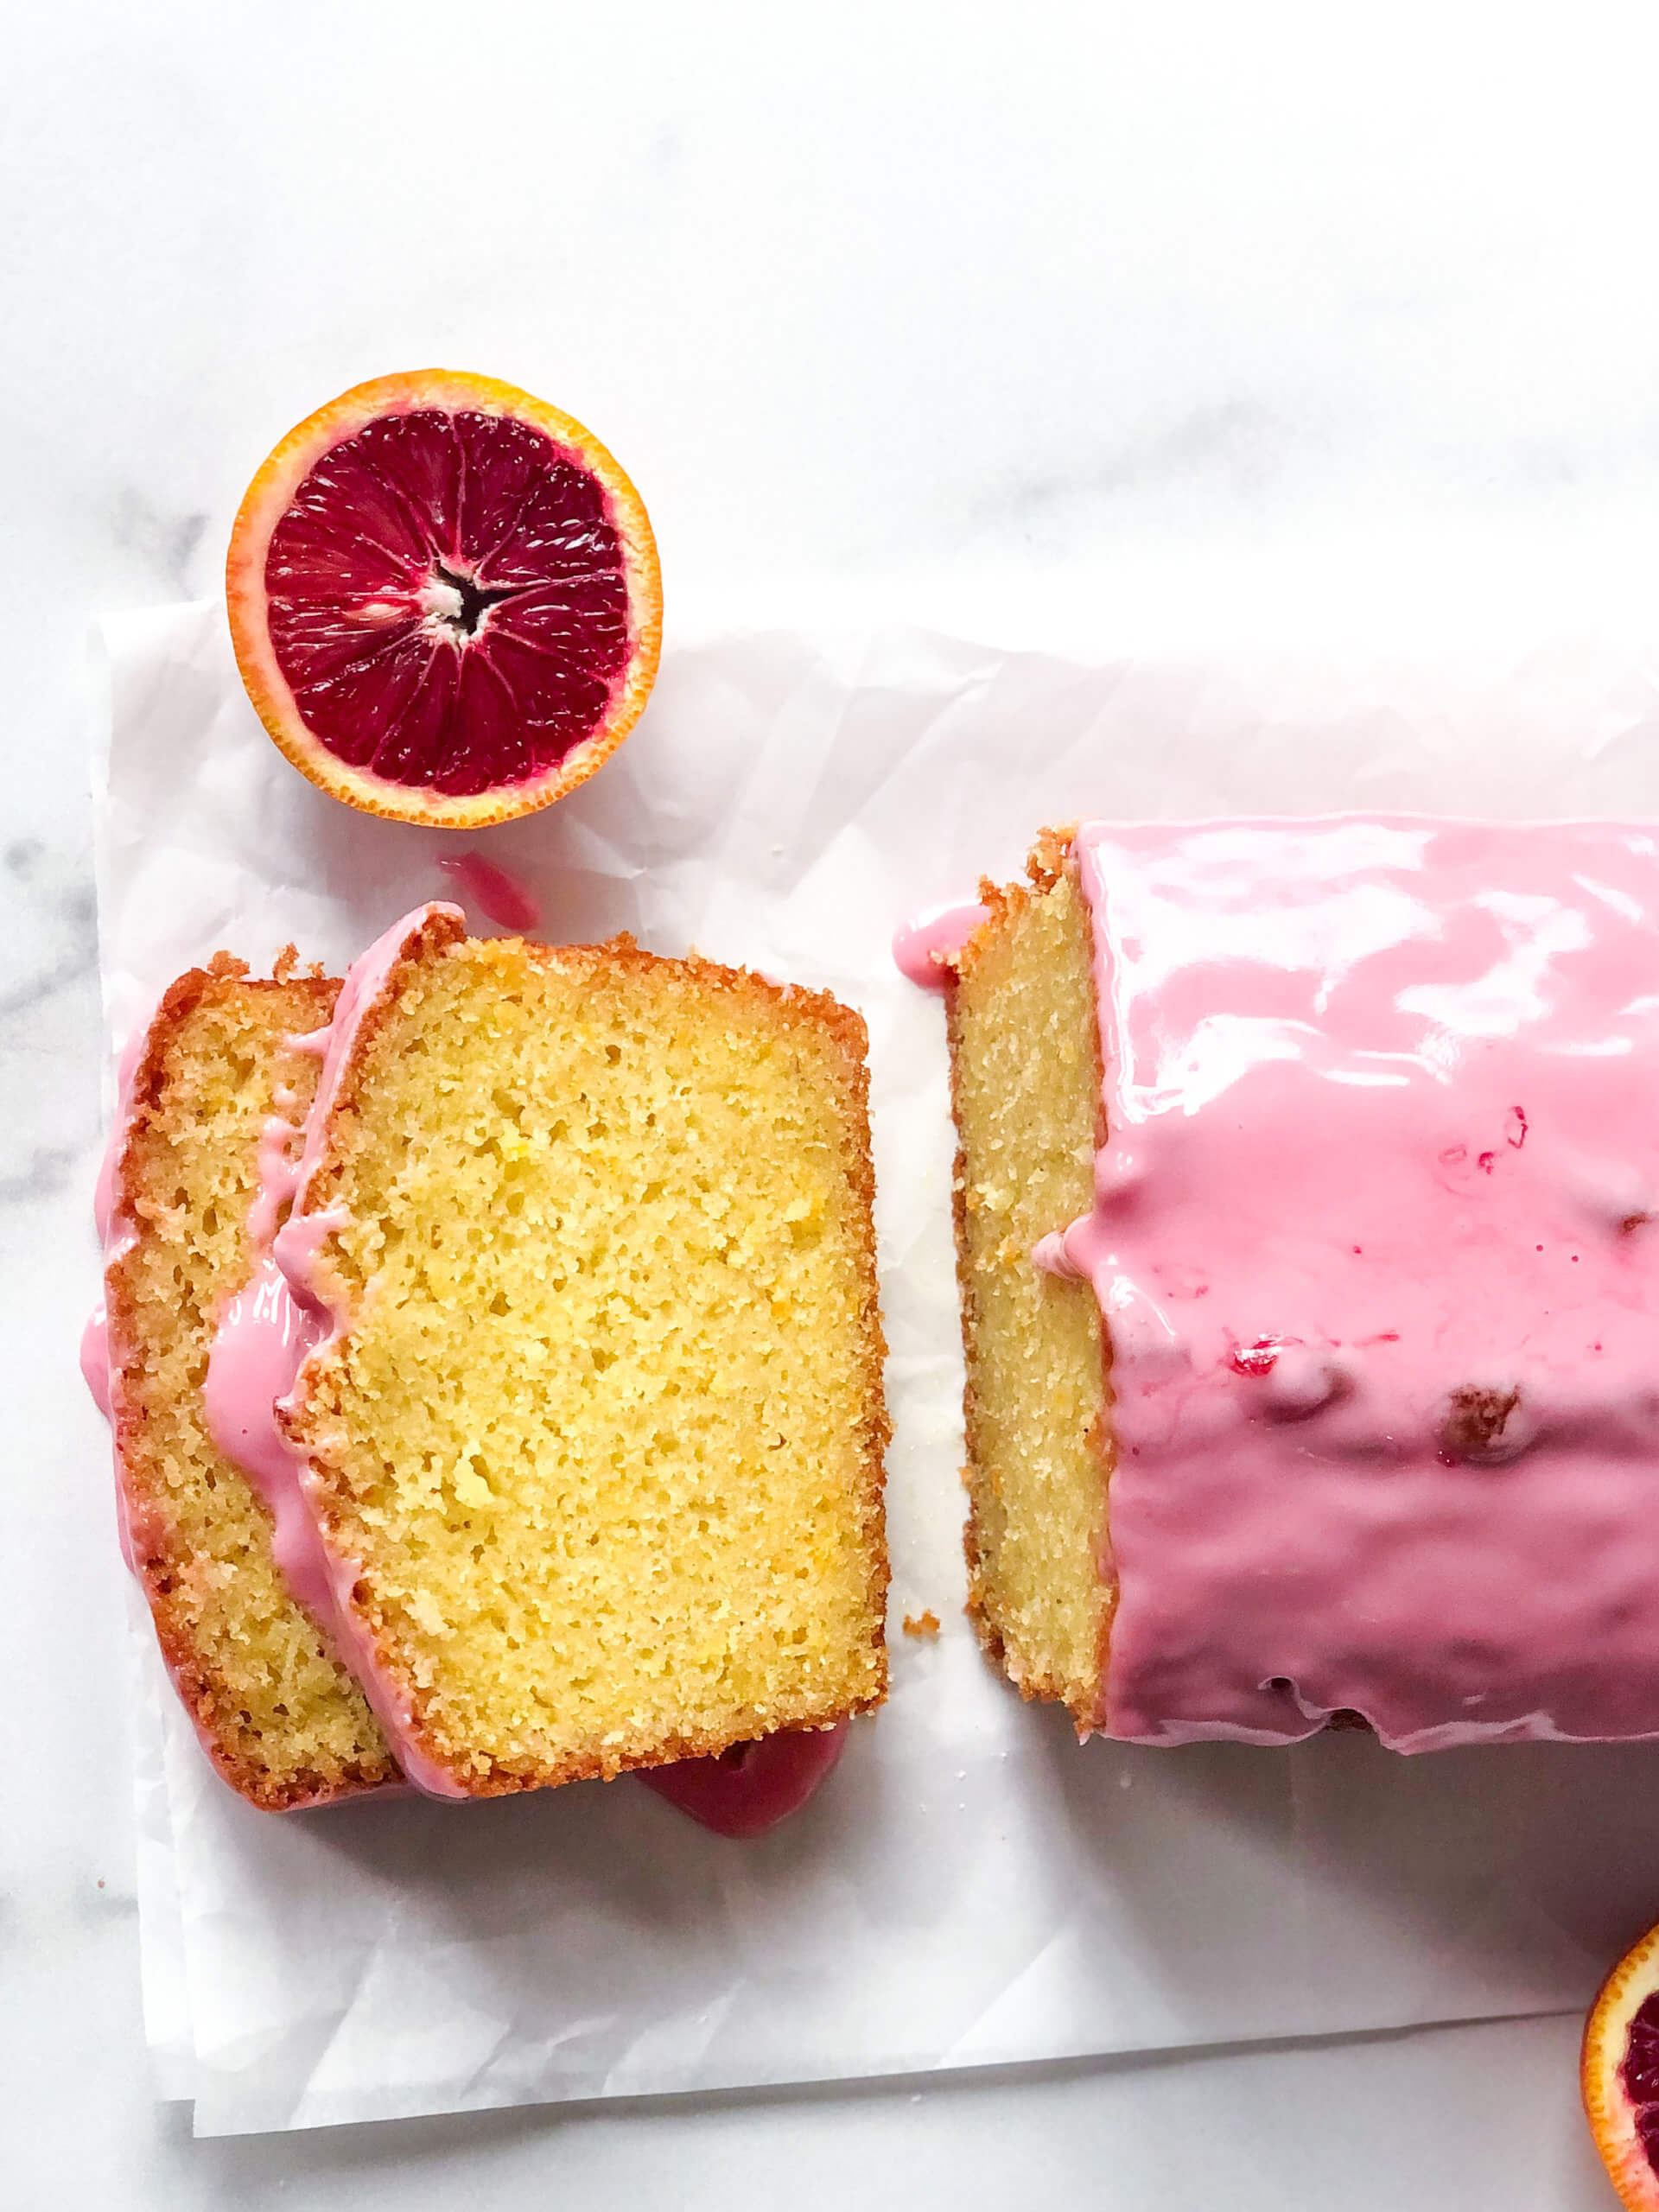 Chocolate Olive Oil Cake with Blood Orange Glaze - Bake from Scratch